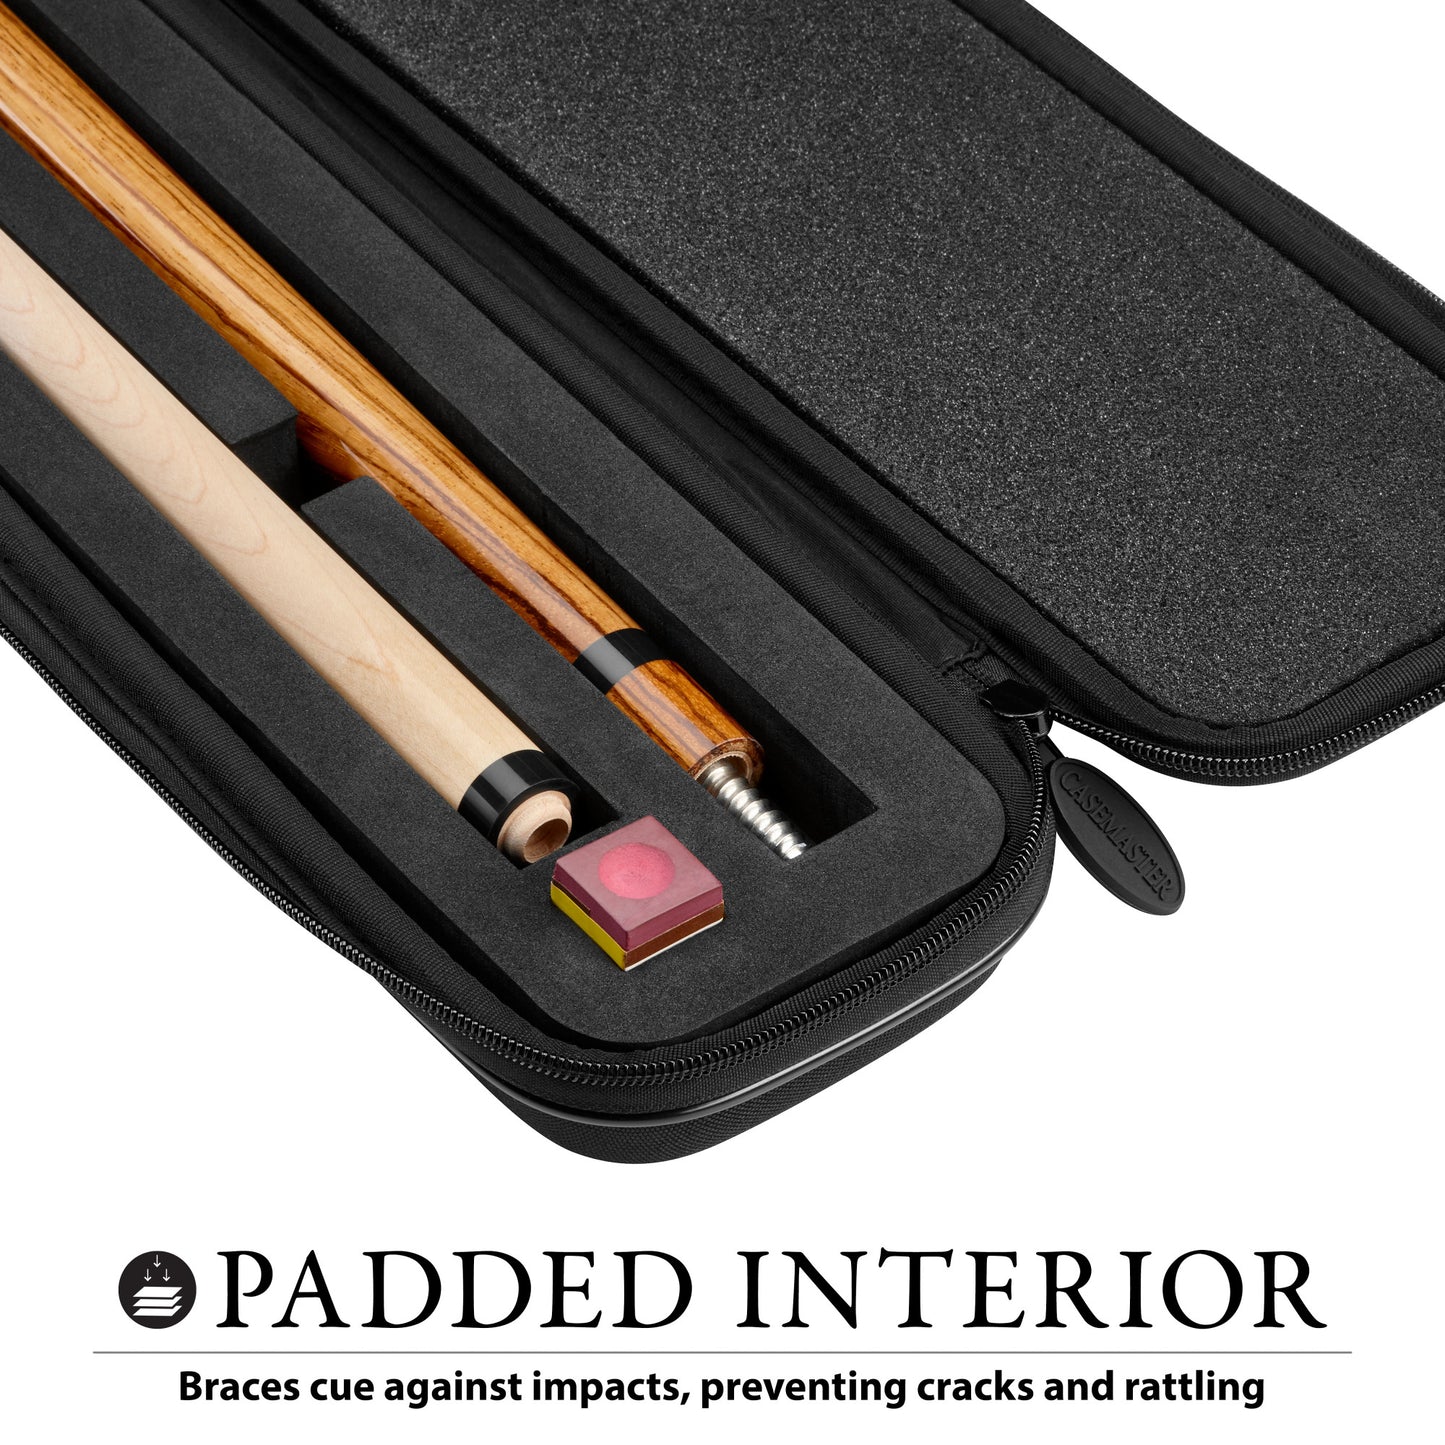 Casemaster Parallax Cue Case Blue showing off the padded interior with 2 pool cue sticks